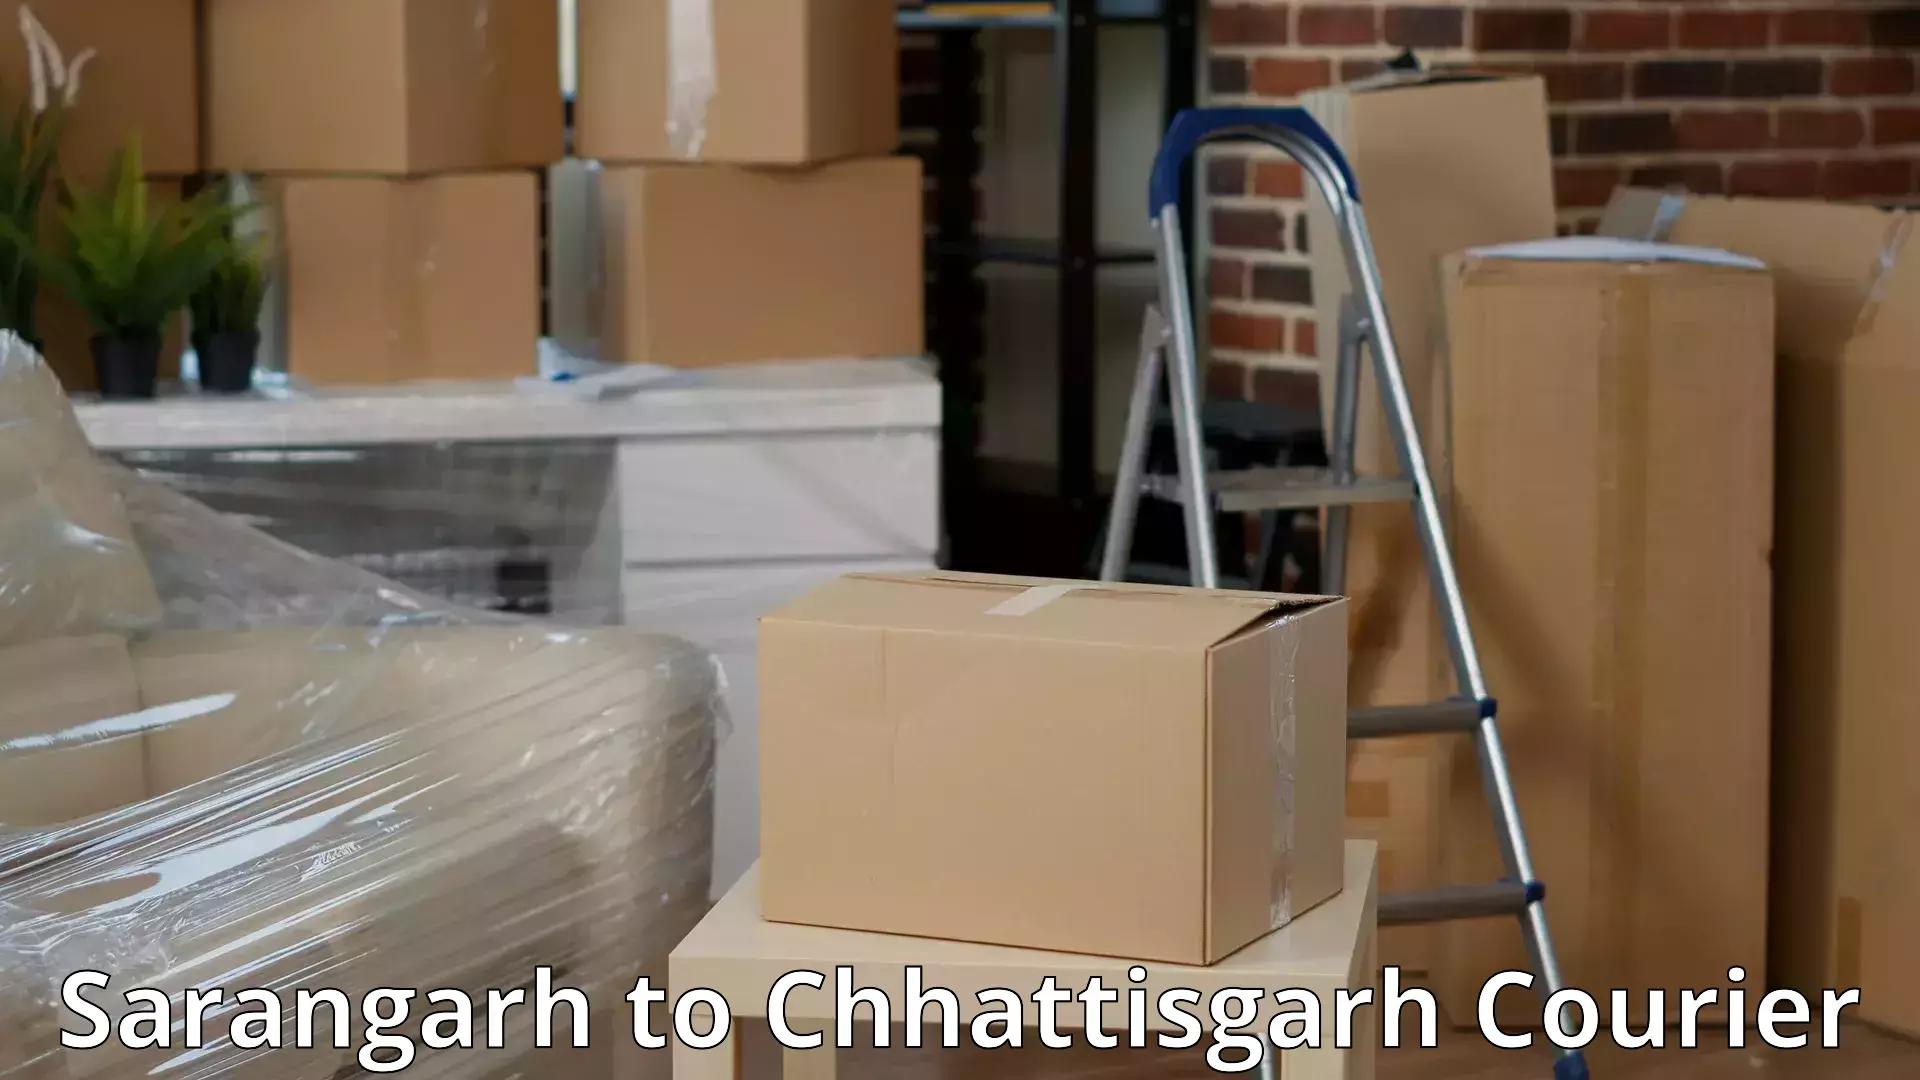 Household goods delivery in Sarangarh to Dongargarh